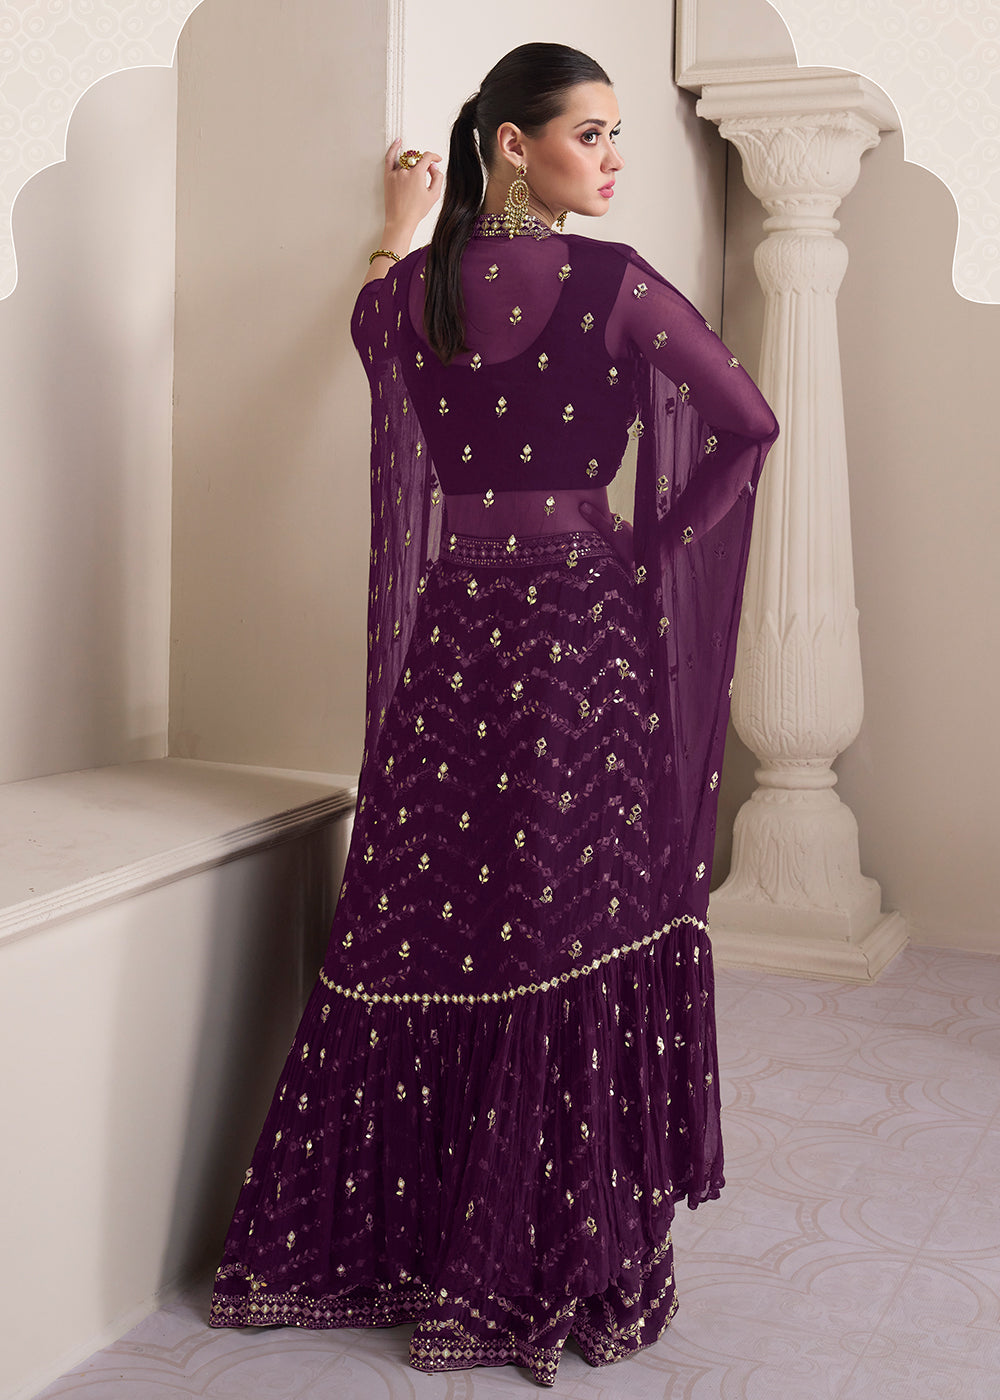 Shop Now Party Plum Purple Embroidered Crop Top Style Sharara Suit Online at Empress Clothing in USA, UK, Canada, Italy & Worldwide. 